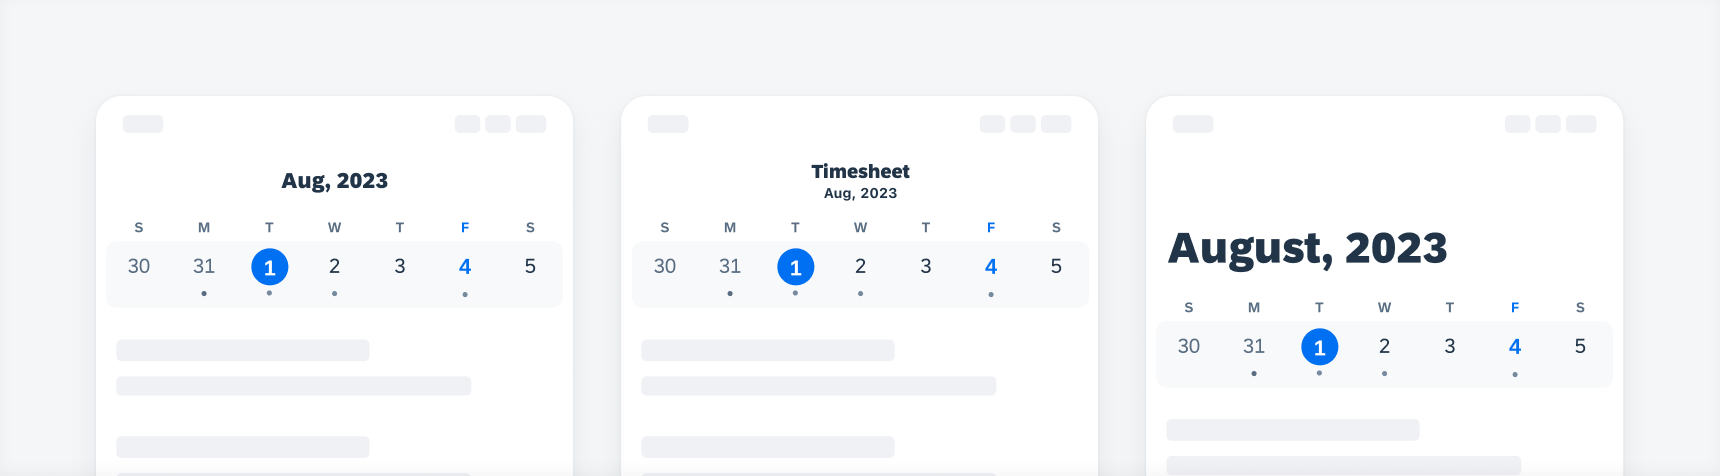 Calendar view with a single title (left), double title (middle), and large title (right)